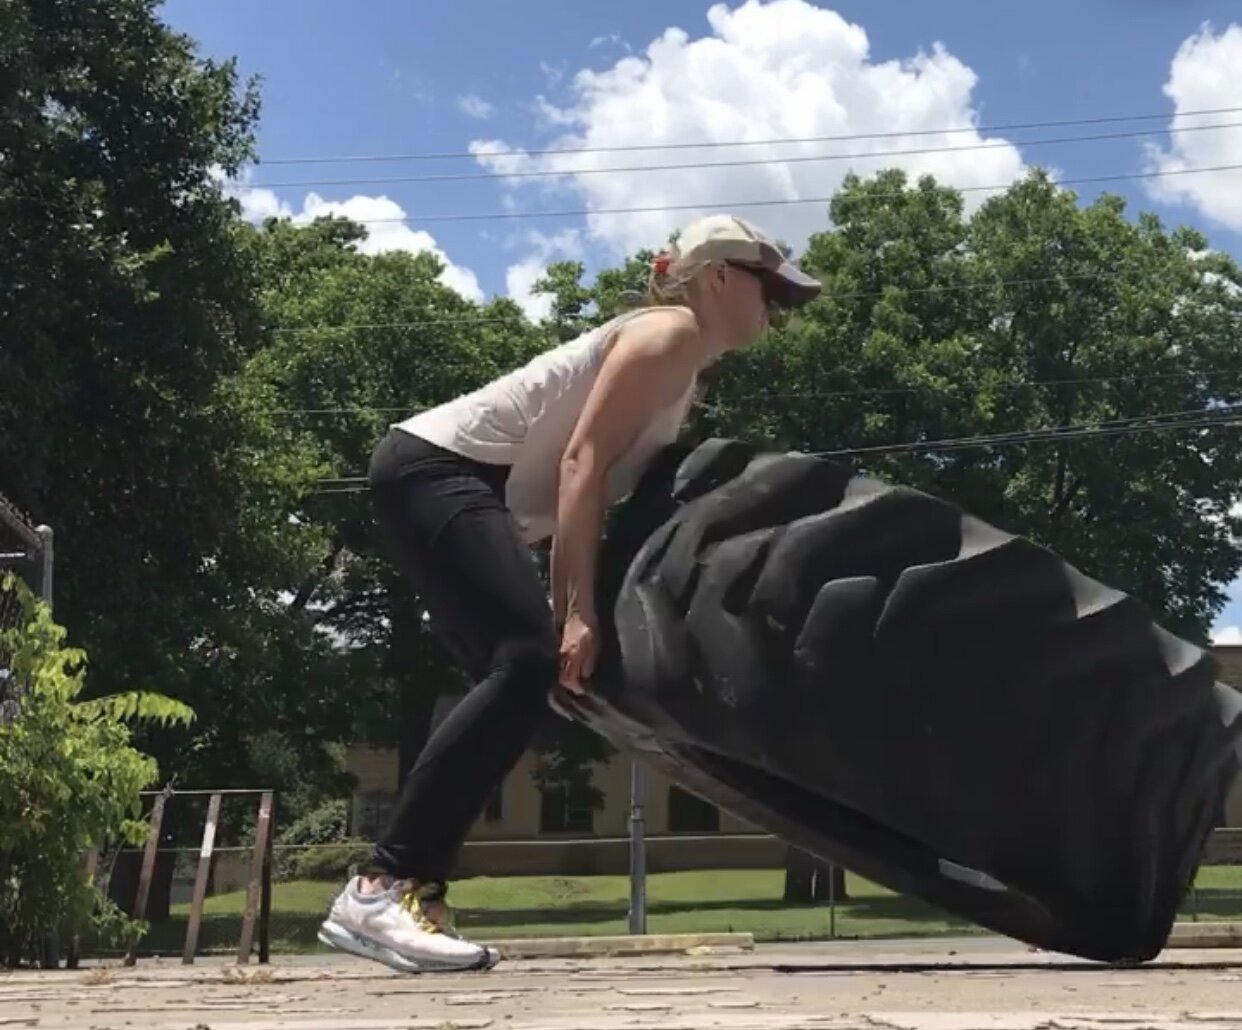 Tire flips; another great outdoor training exercise. We have a variety of tires so everybody can flip tires at Hyde Park Gym.